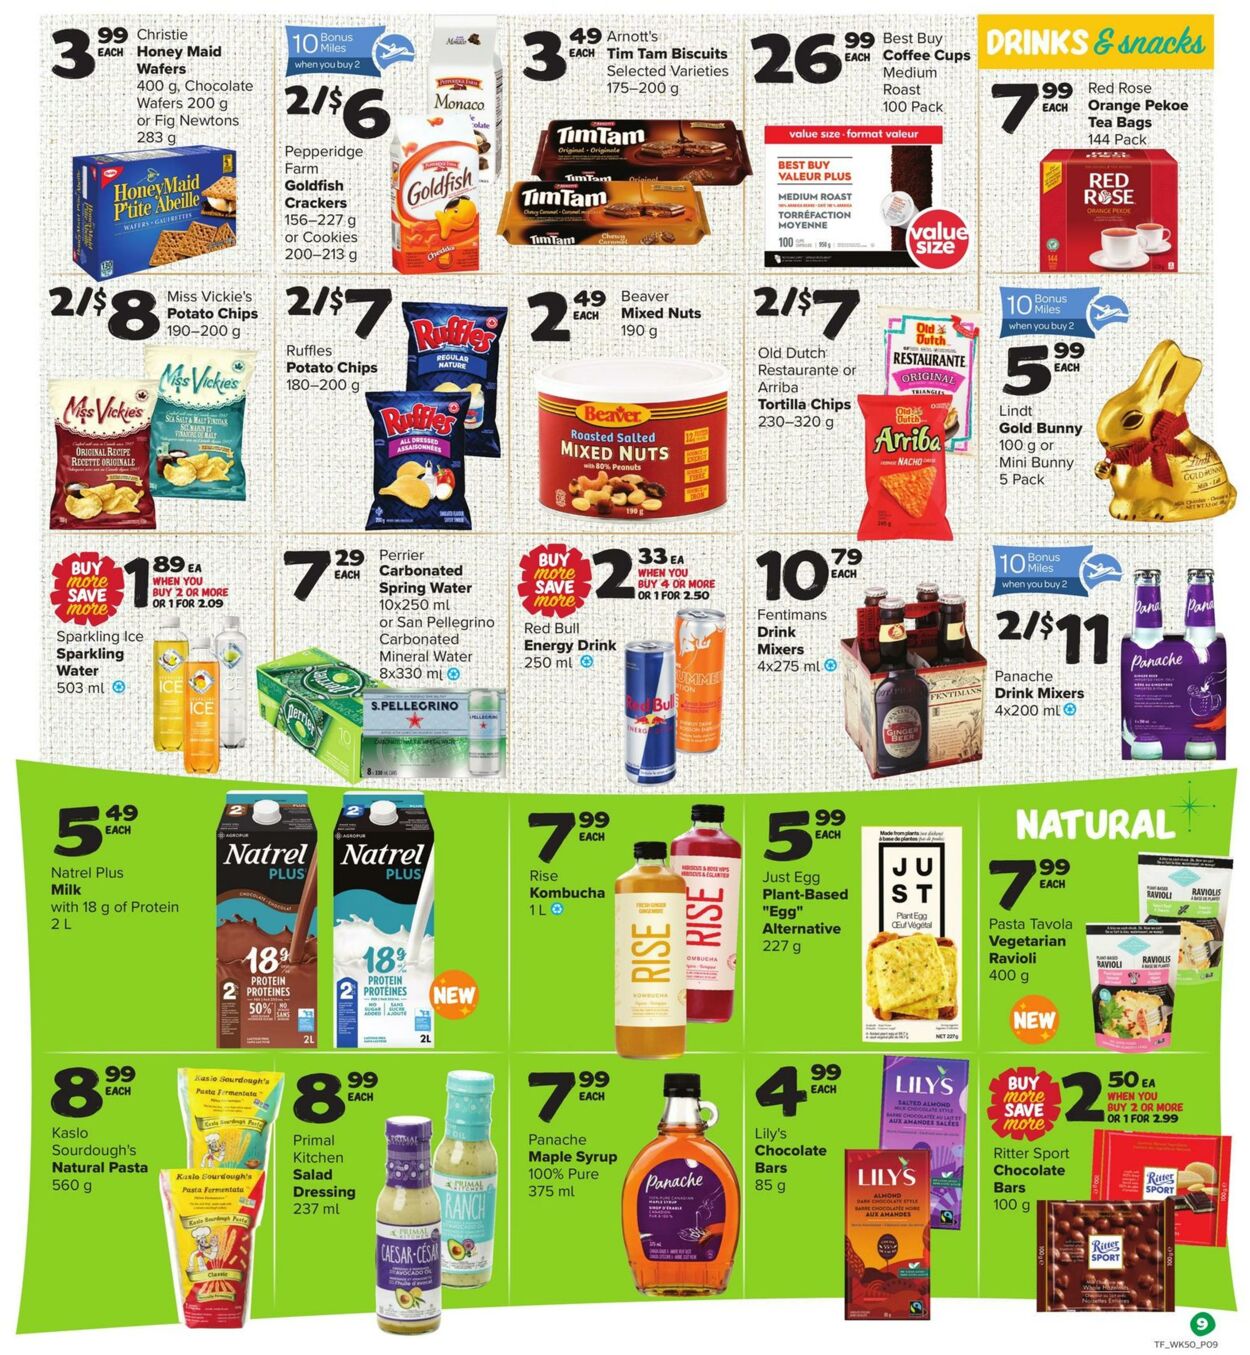 Flyer Thrifty Foods 07.04.2022 - 13.04.2022